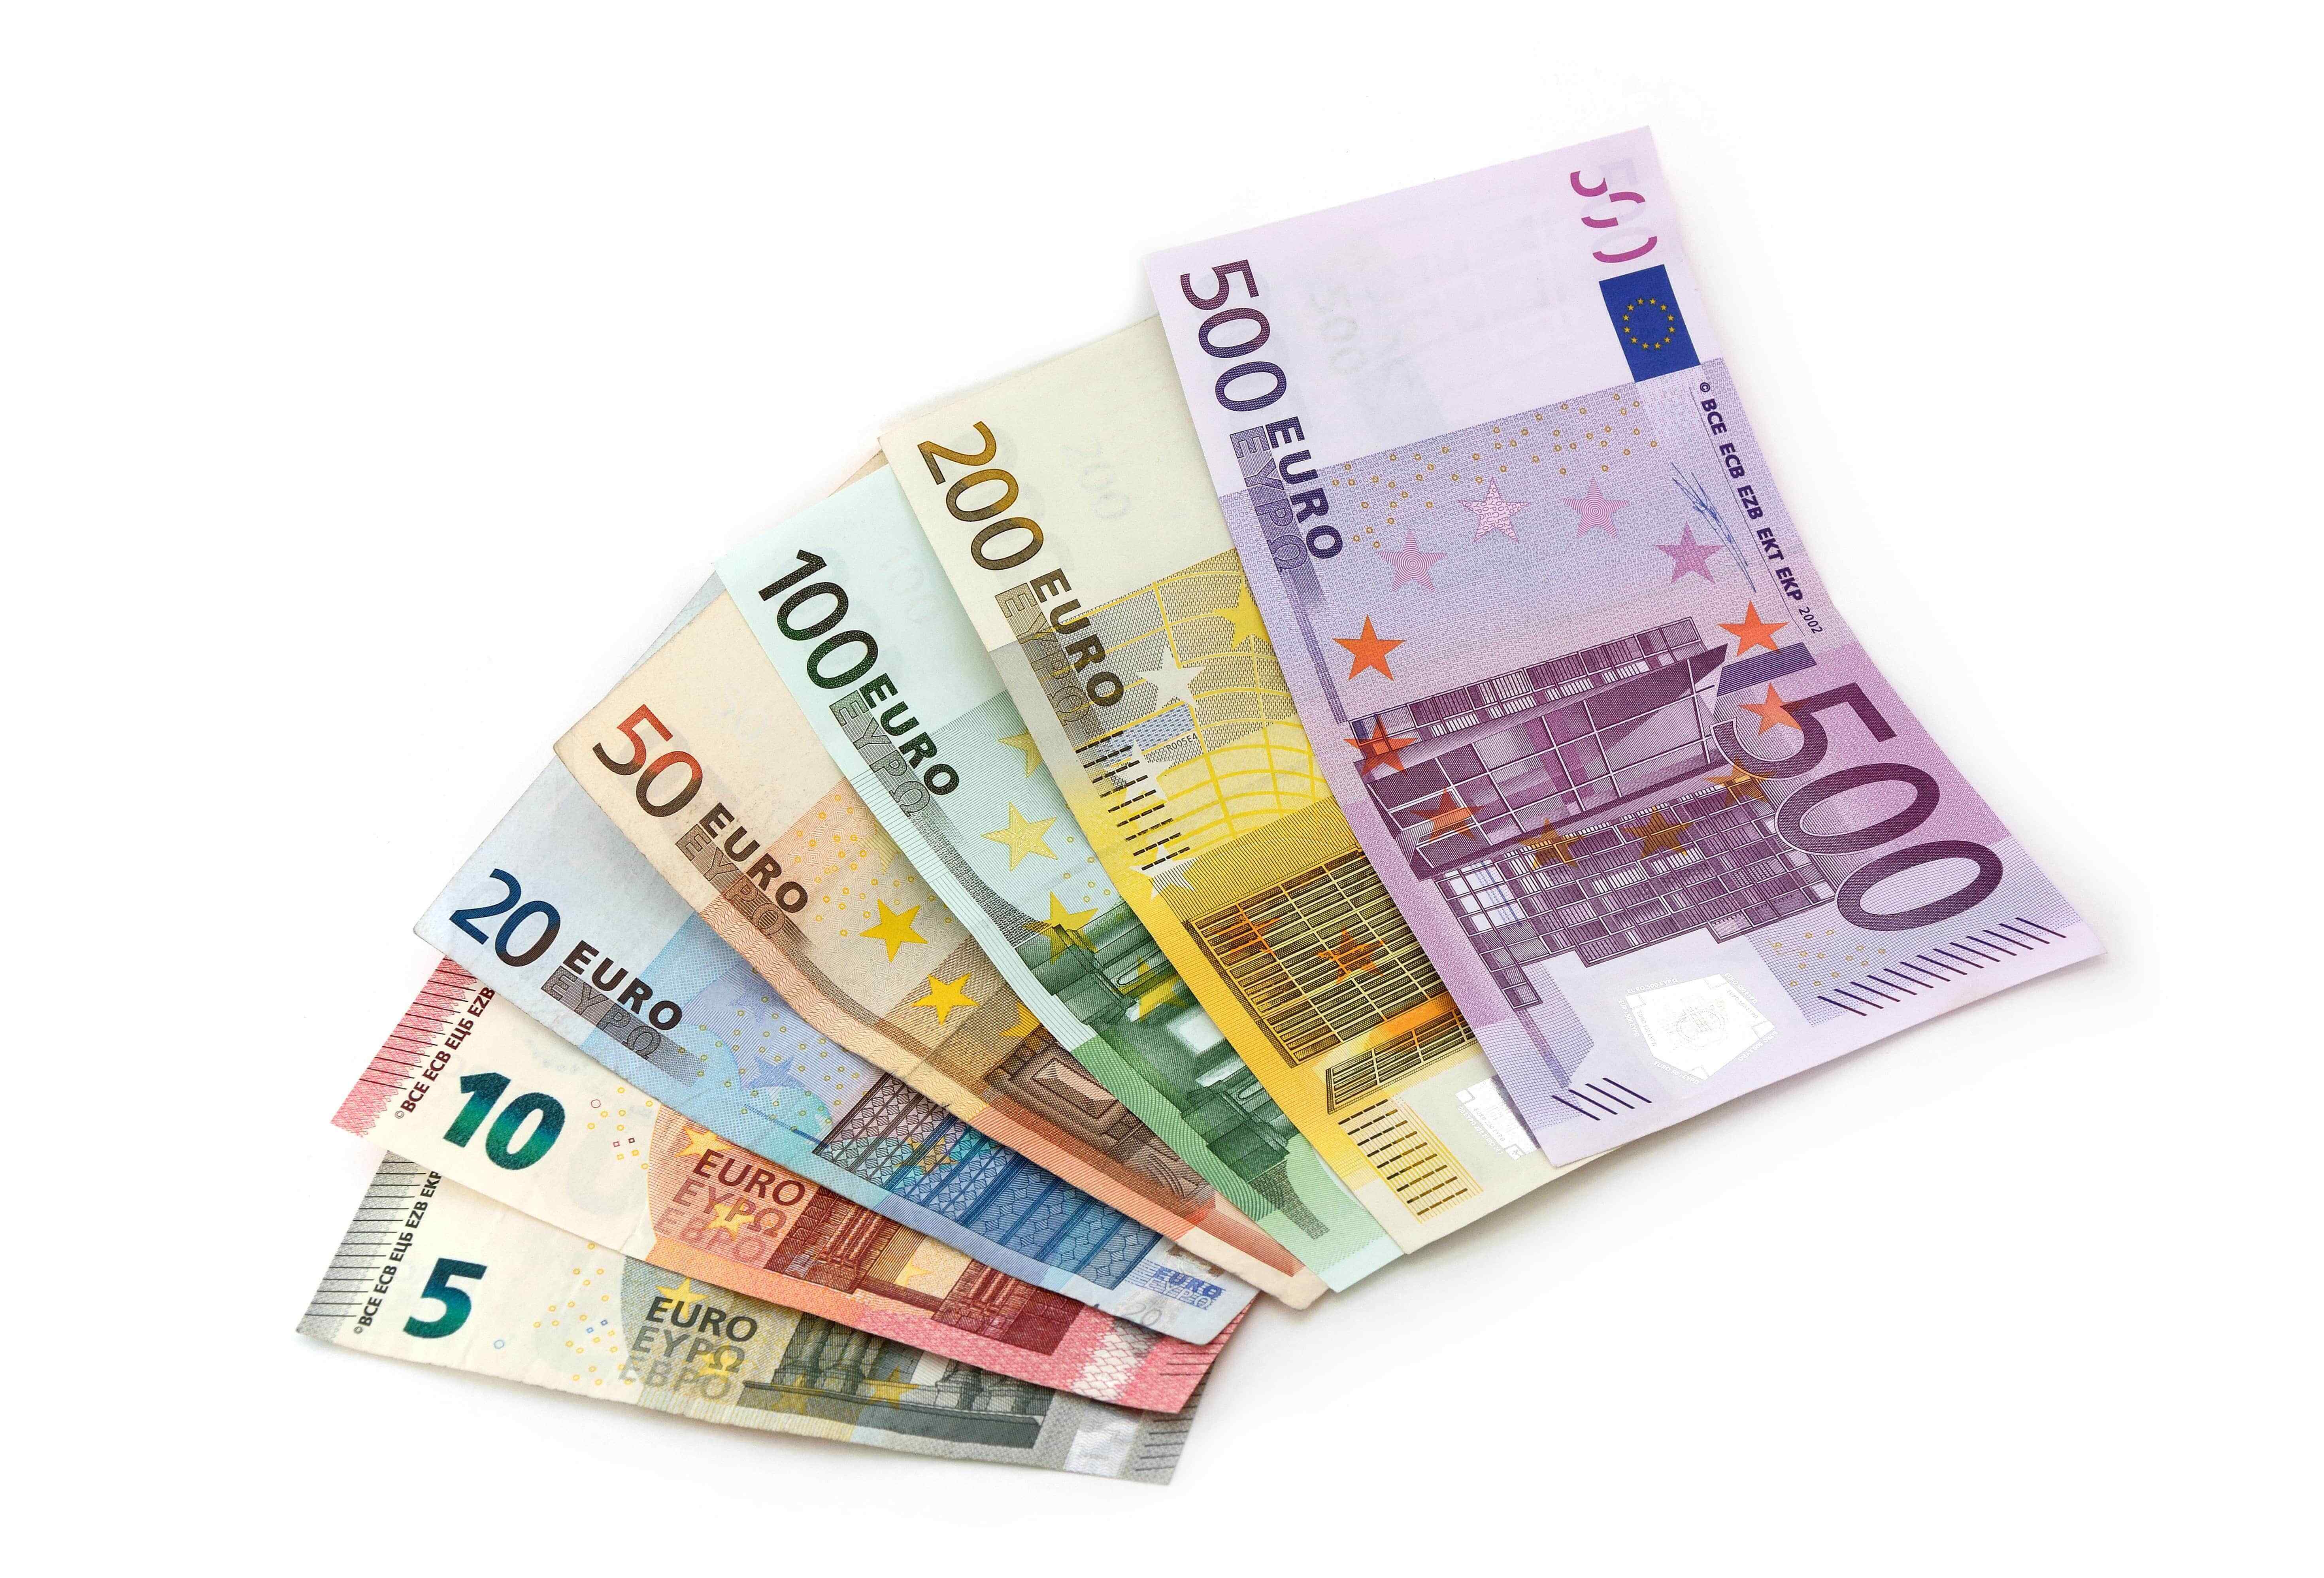 All Euro banknotes in denominations from 5 to 500